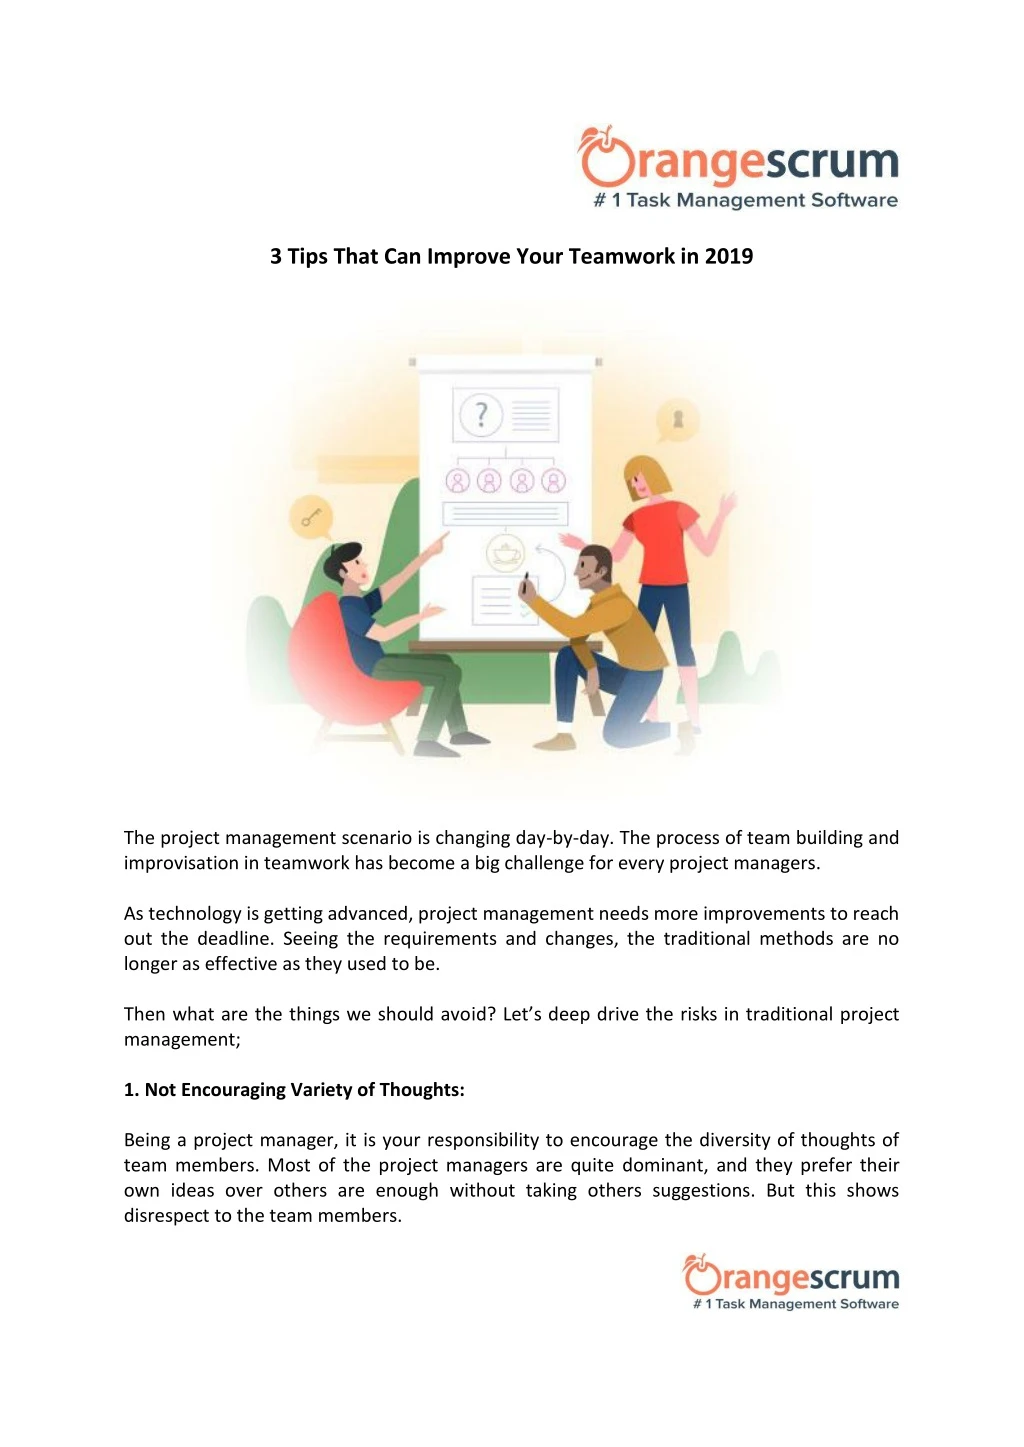 3 tips that can improve your teamwork in 2019